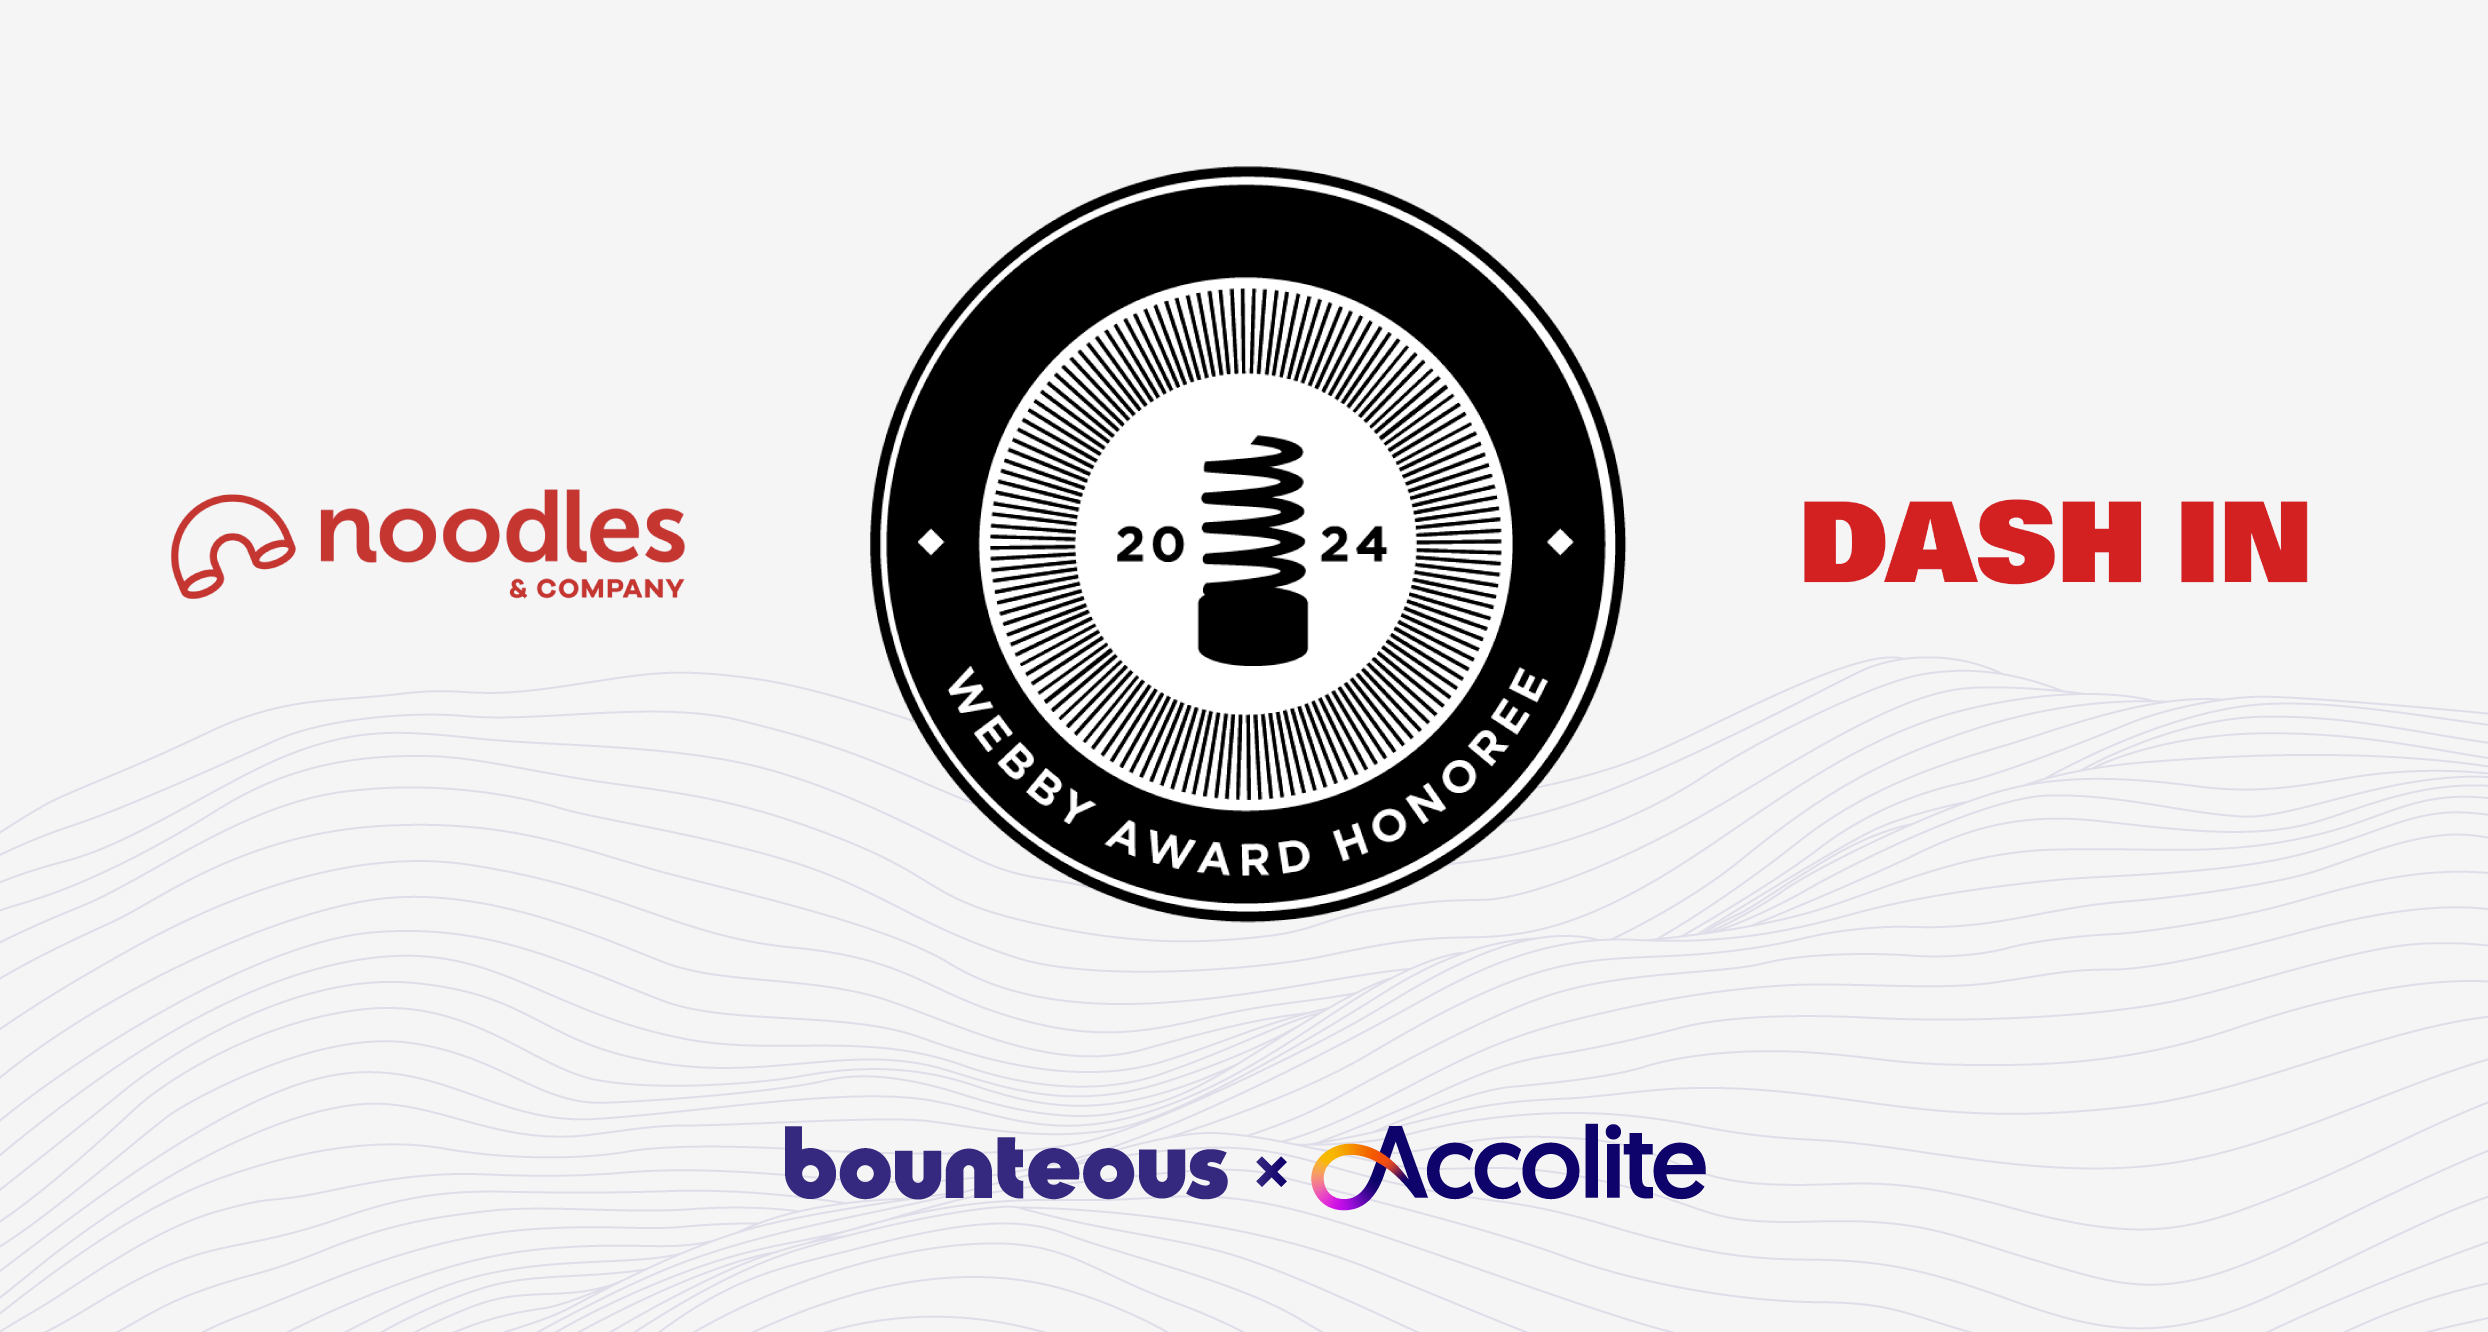  Bounteous x Accolite Recognized as Two-Time 28th Annual Webby Award Honoree